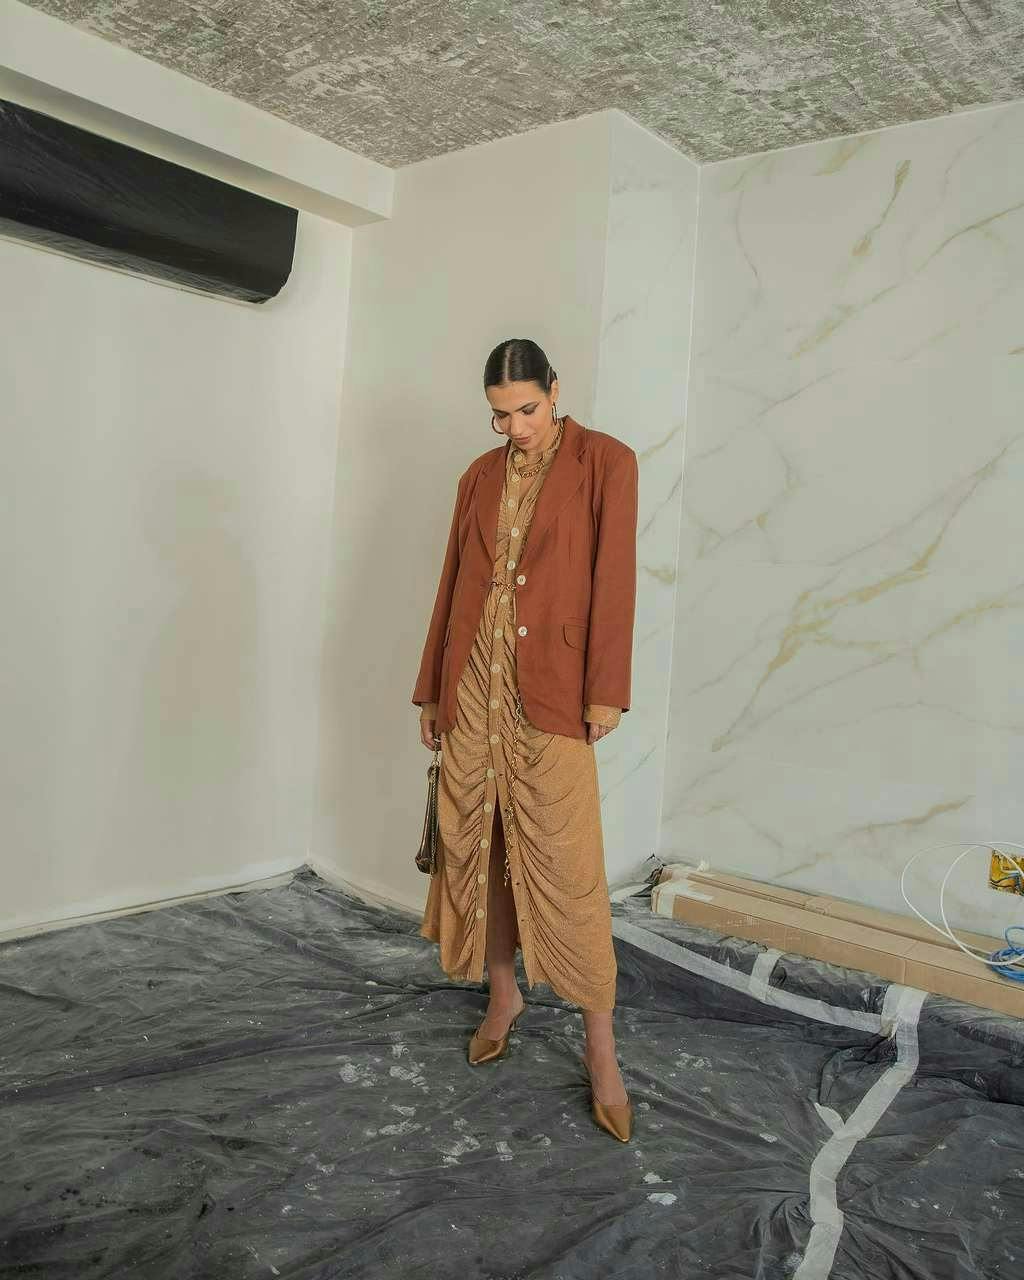 clothing coat person standing adult male man floor